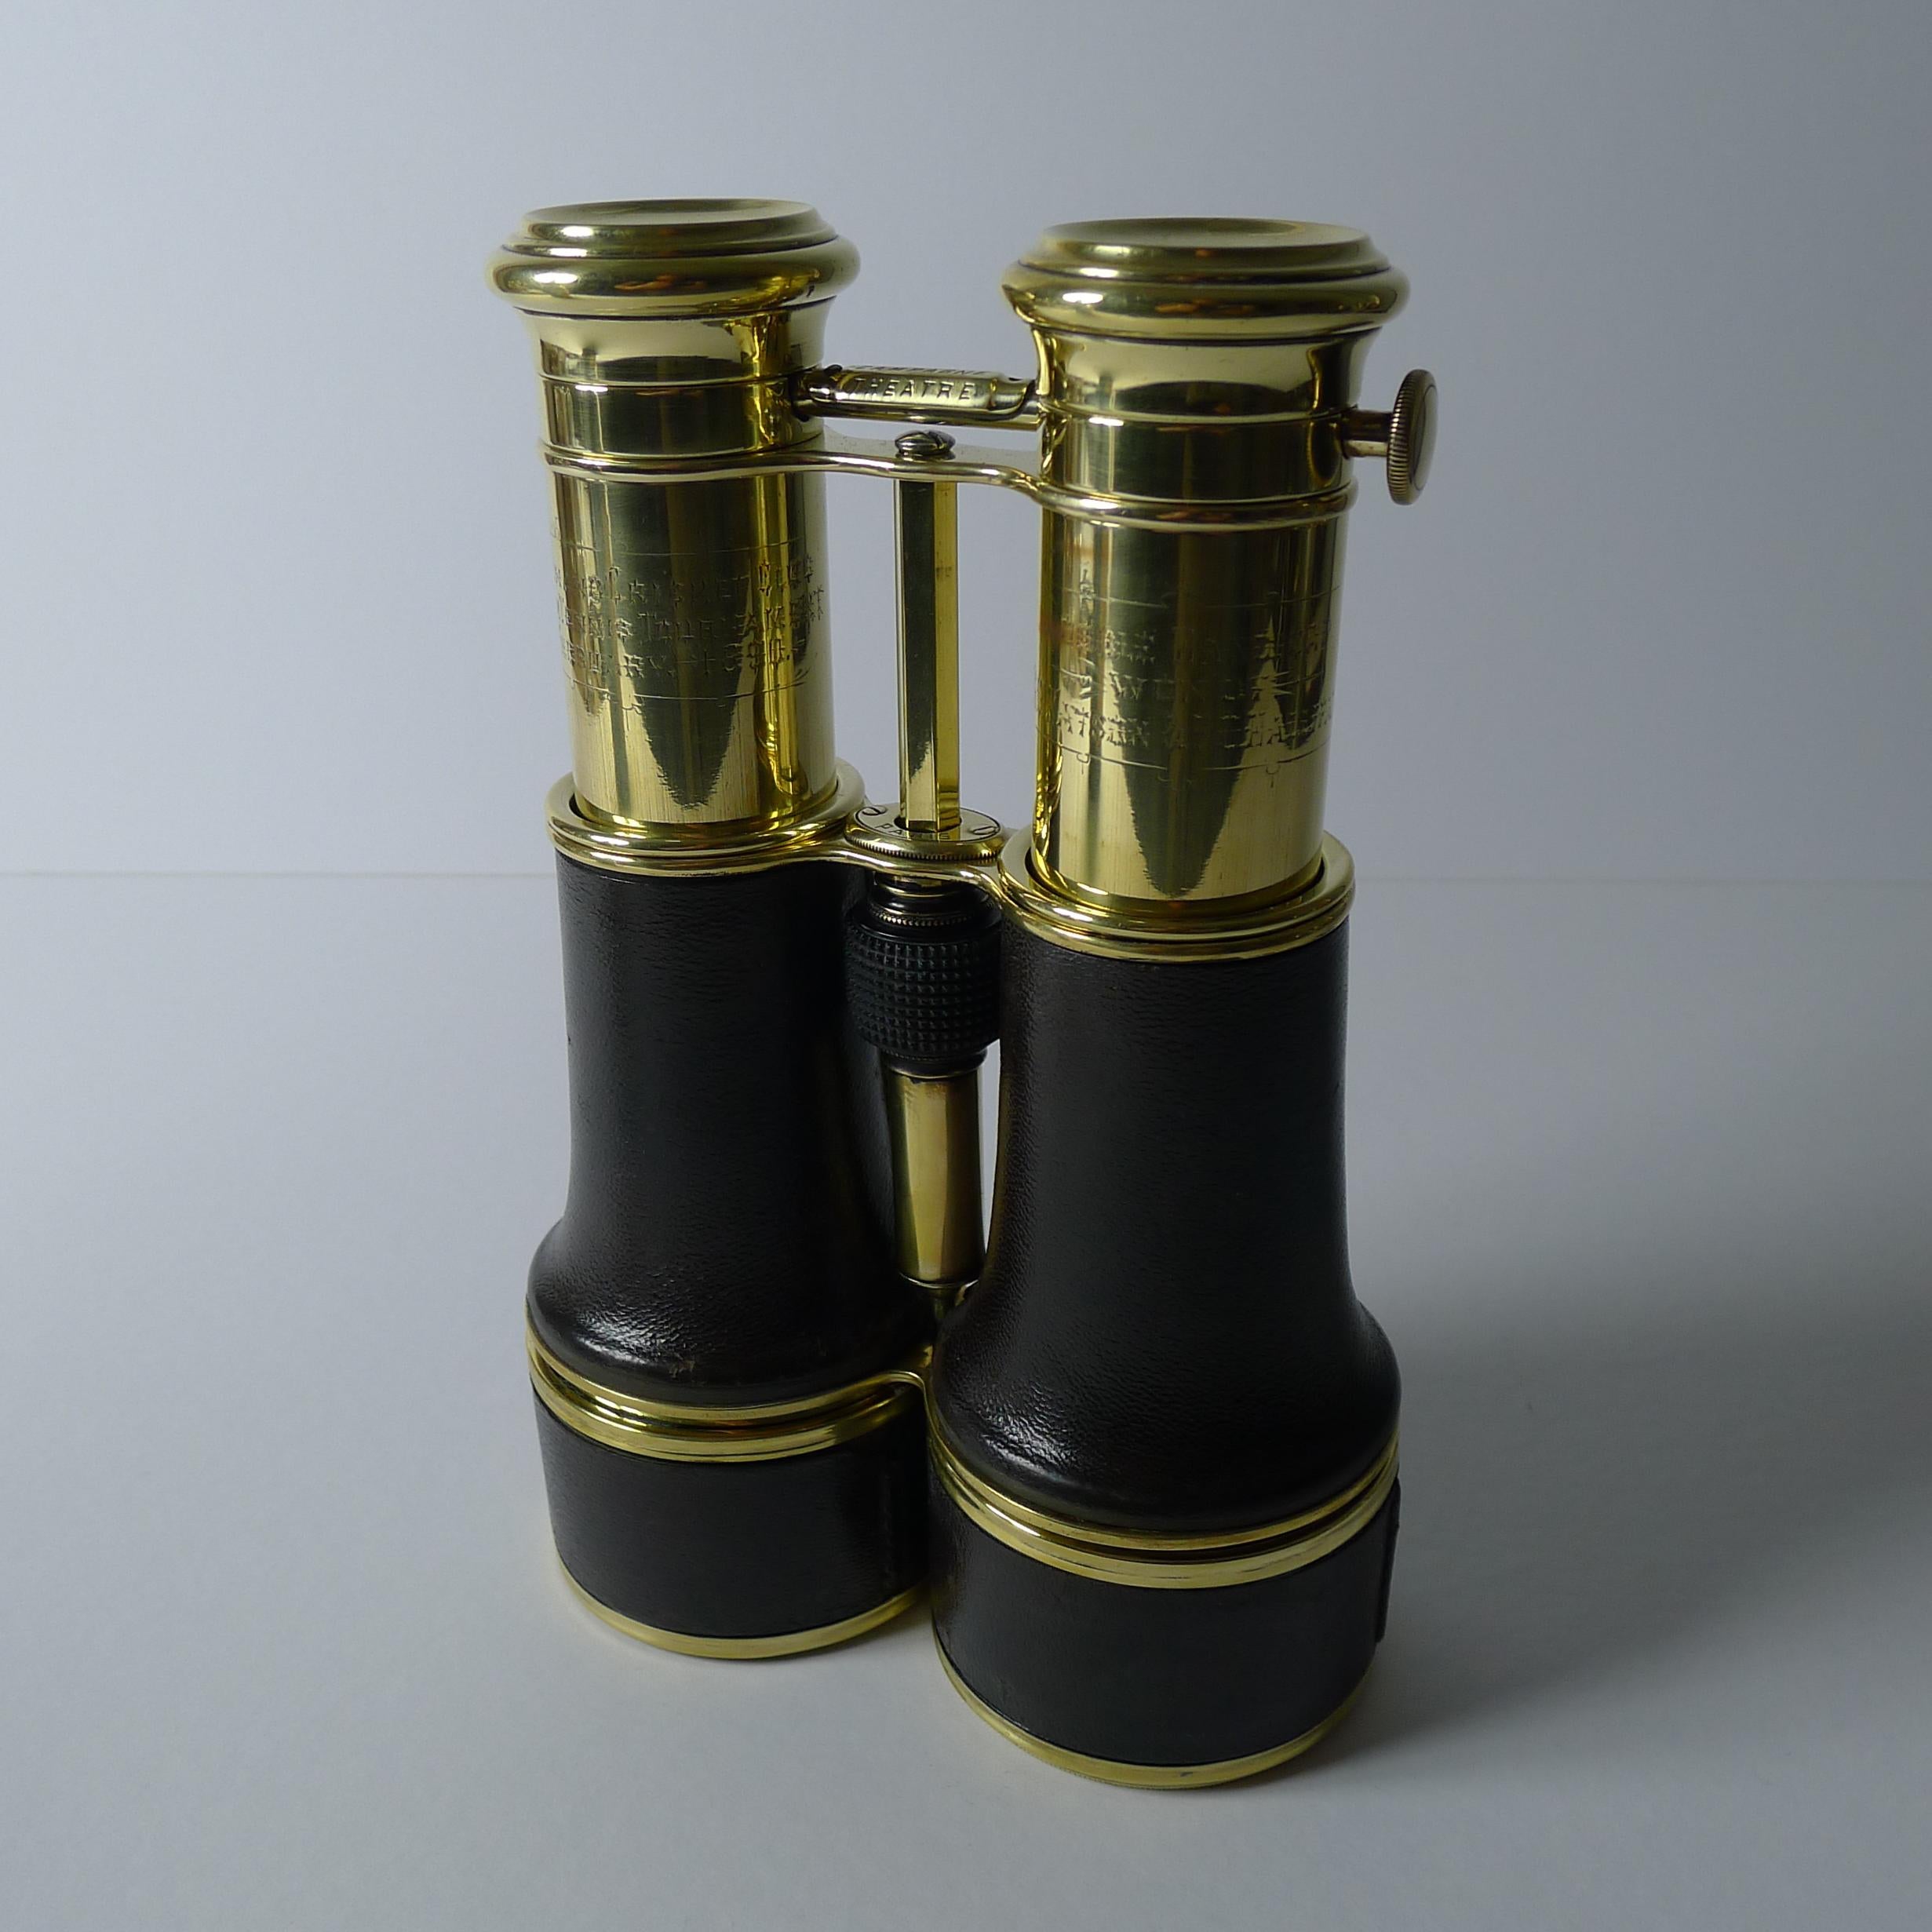 Brass Antique French Triple Optic Binoculars - Marine / Theatre / Field Dated1890 For Sale